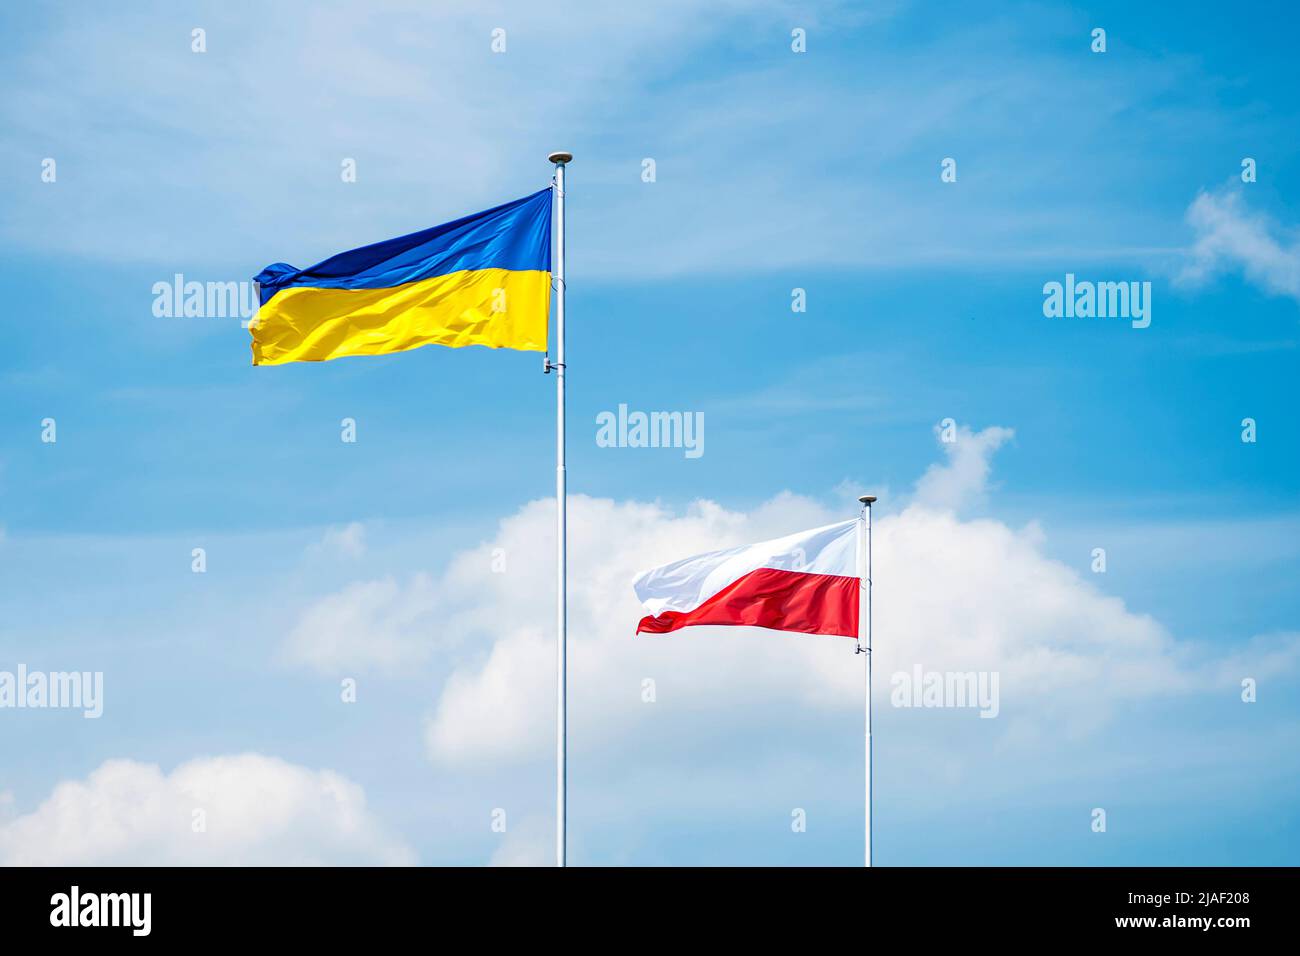 State flags of Ukraine and Poland on flagpoles over blue cloudy sky background. Stock Photo